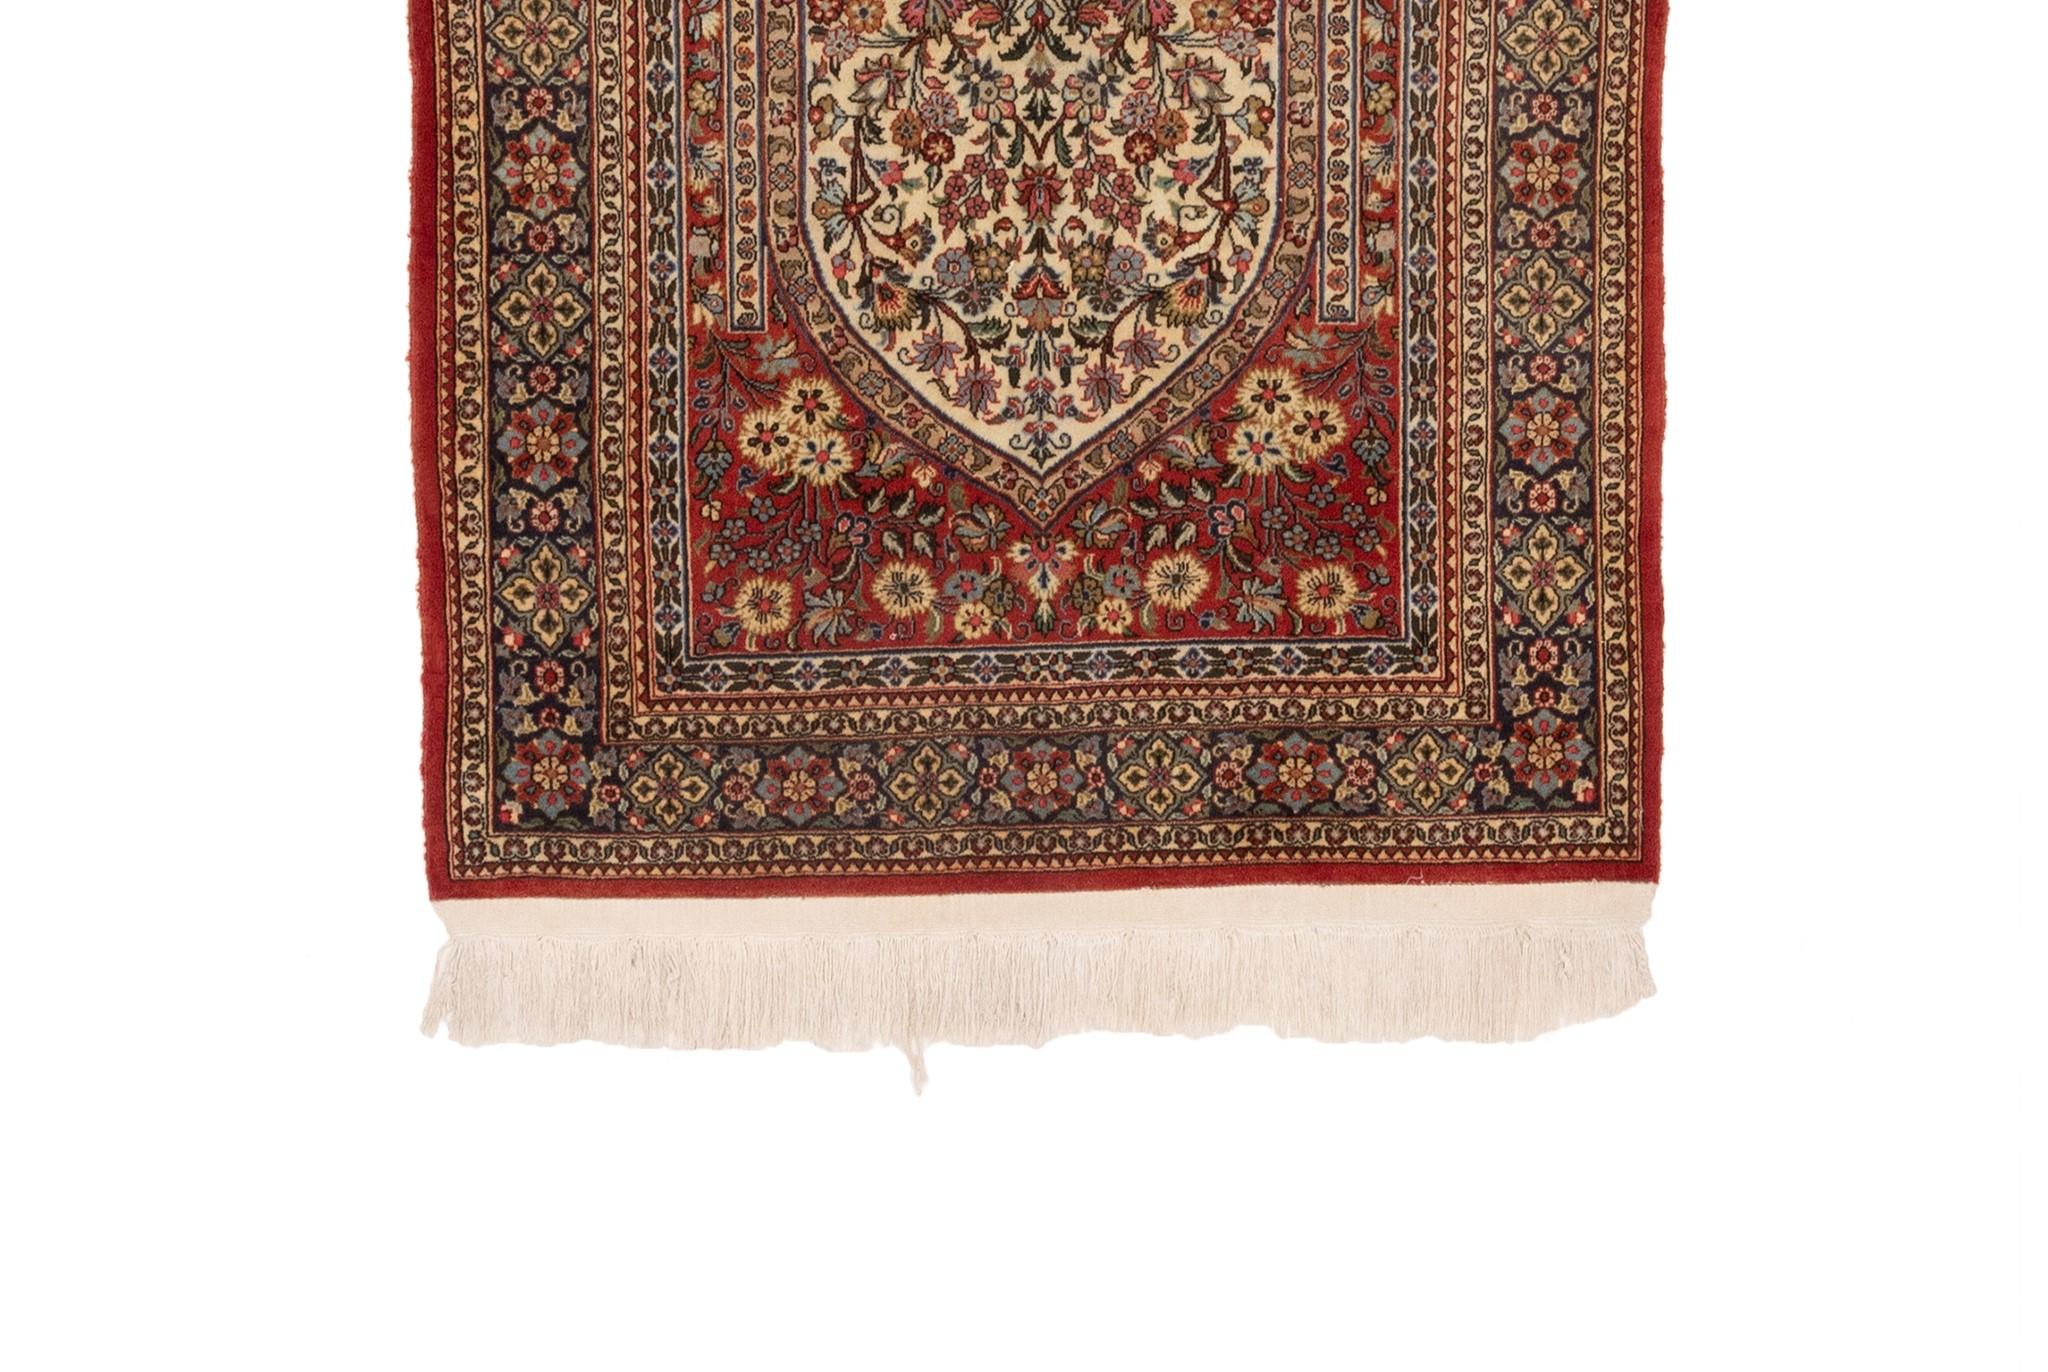 This small area rug, known as the 19th Century Red Ivory Blue Floral Kashan, is crafted from top-quality wool. Its design draws inspiration from traditional motifs found in architectural tiles that once adorned historical buildings. The kashan style